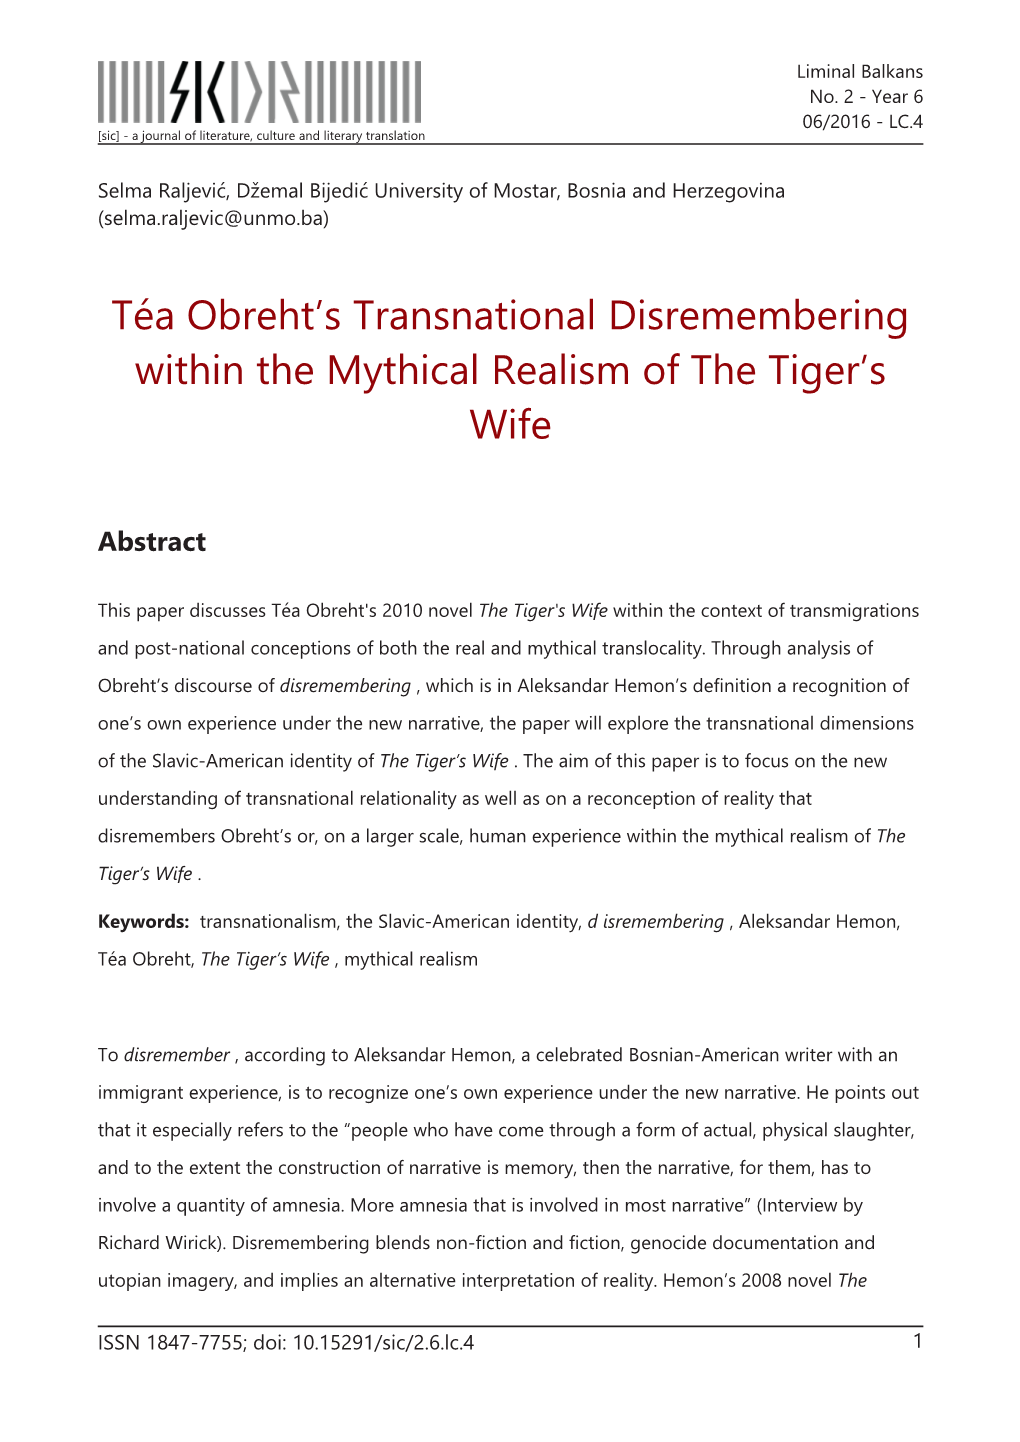 Téa Obreht's Transnational Disremembering Within the Mythical Realism of the Tiger's Wife